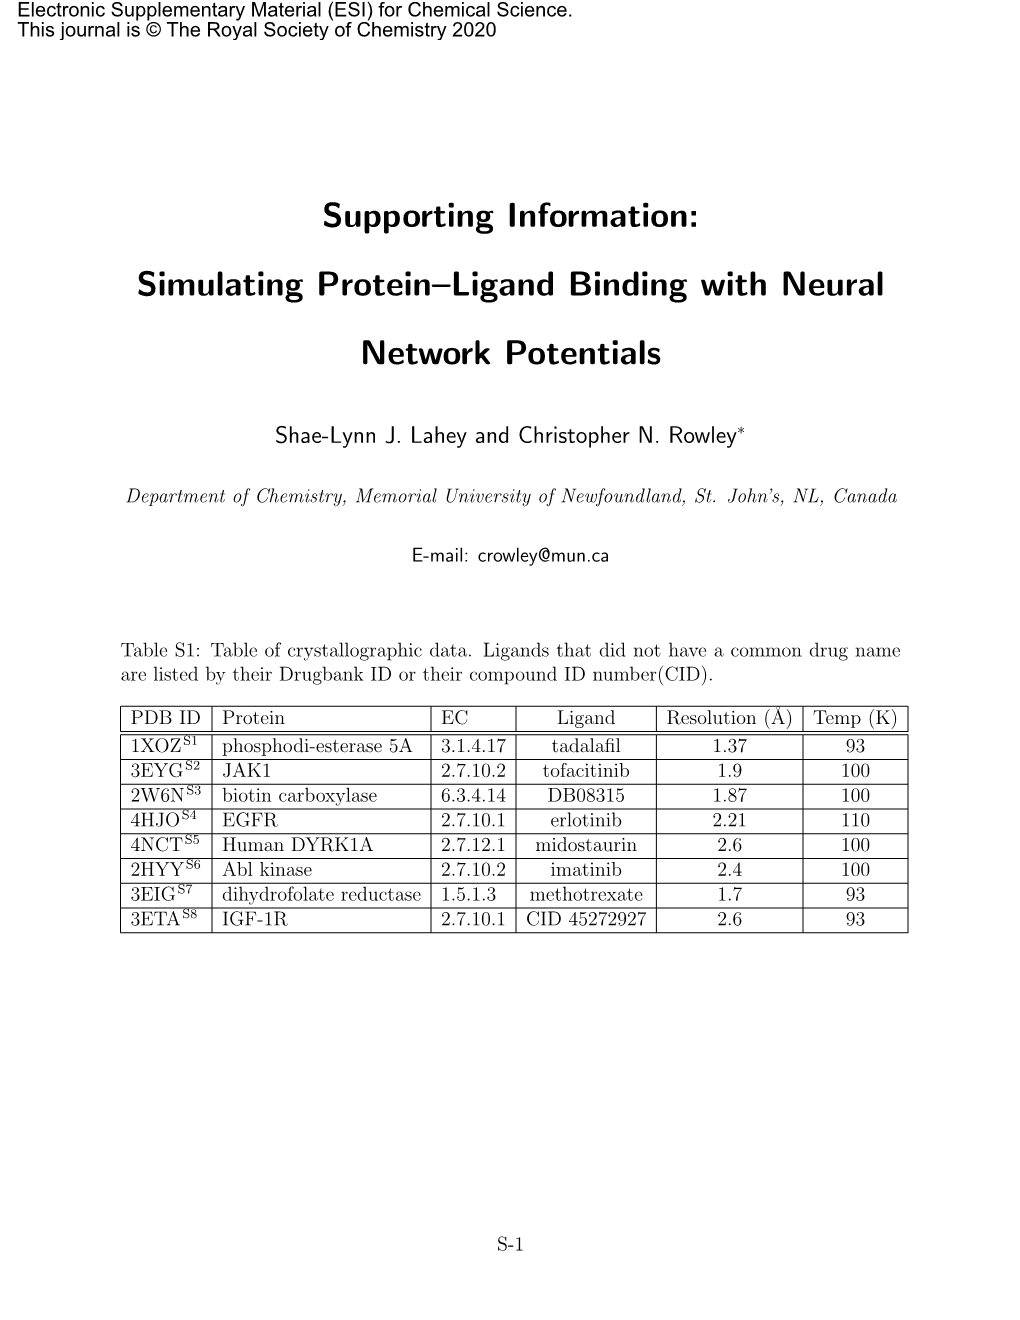 Simulating Protein–Ligand Binding with Neural Network Potentials